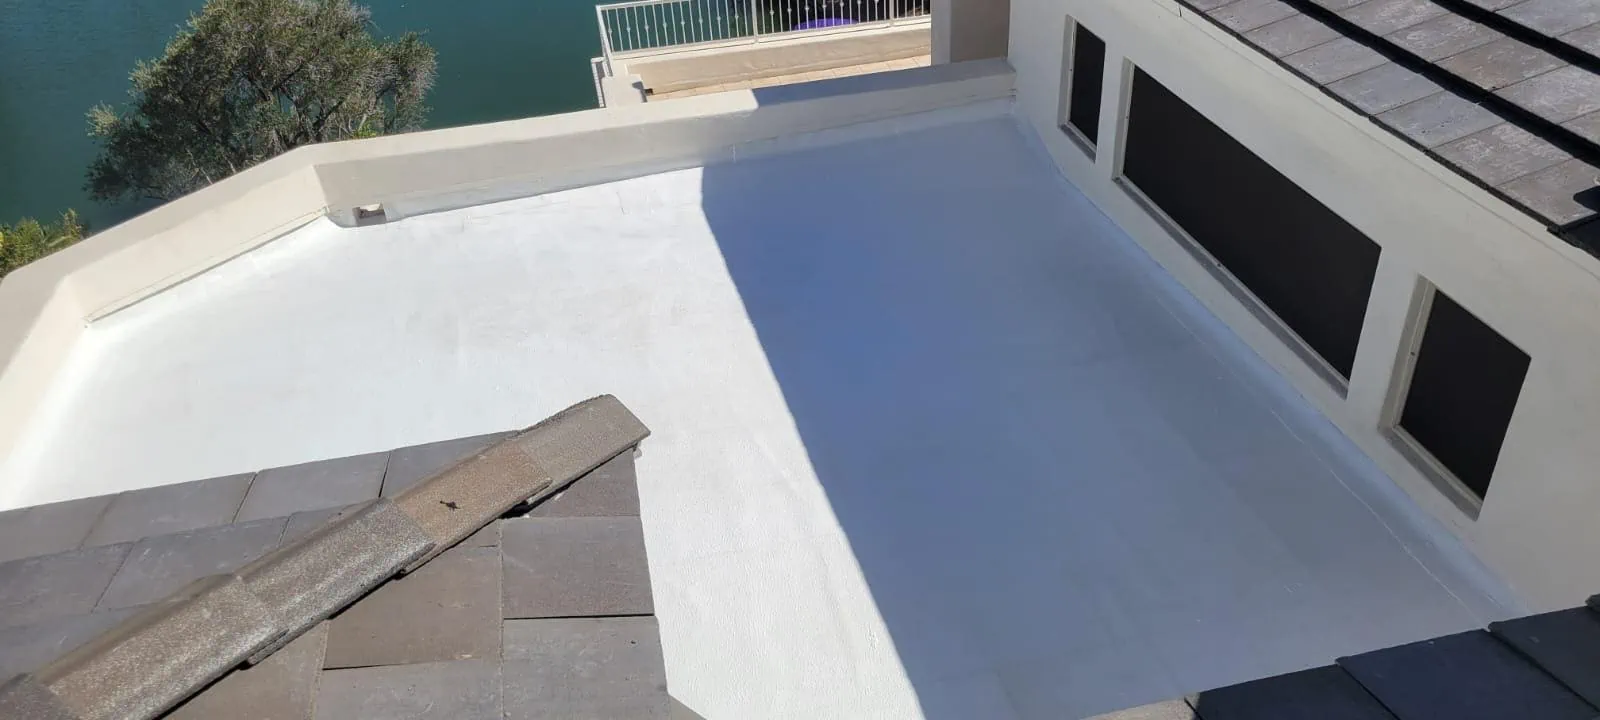 are roof coatings any good? new roof